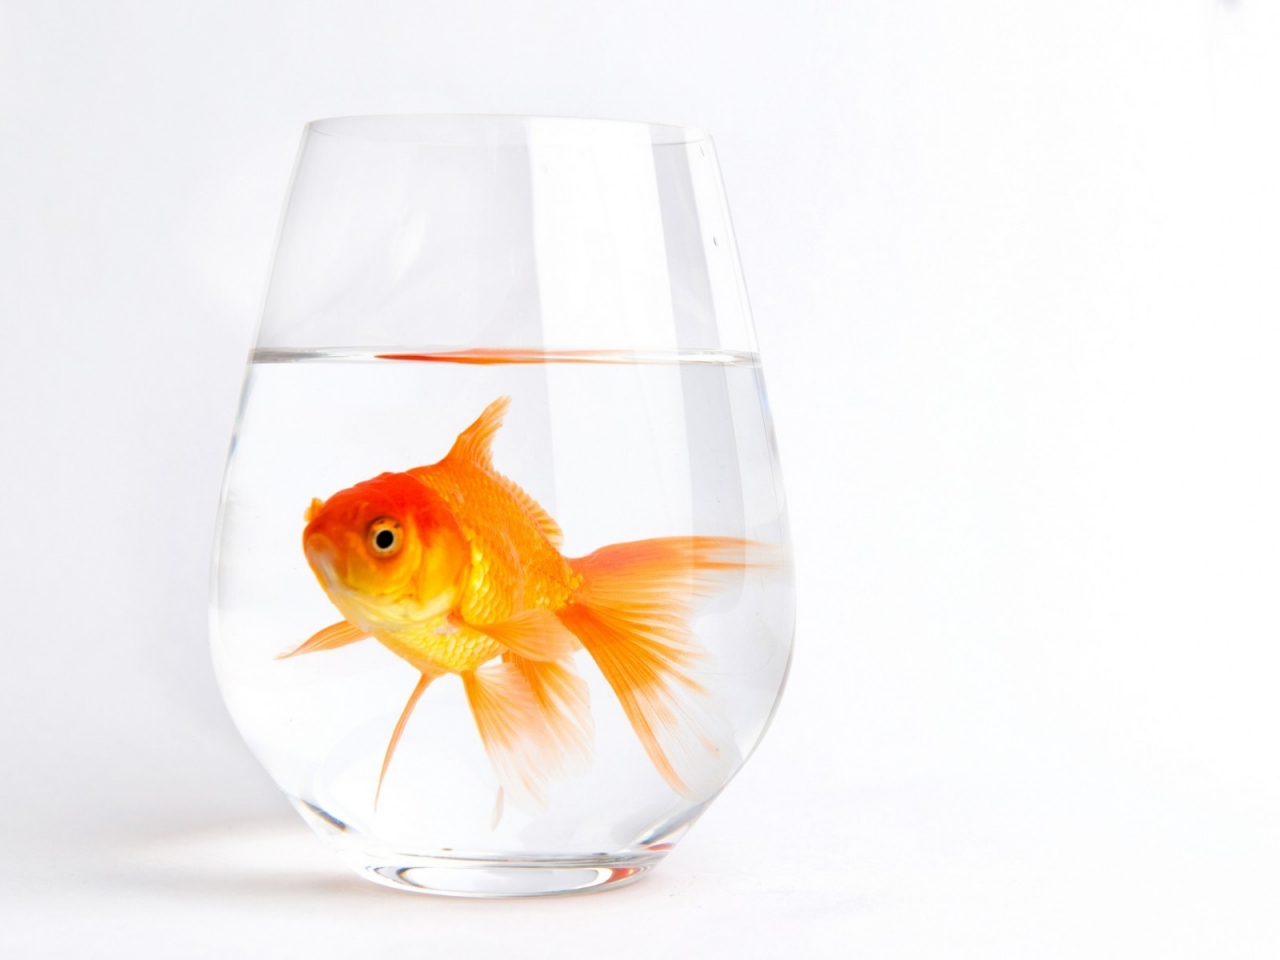 Lonely Gold Fish for 1280 x 960 resolution